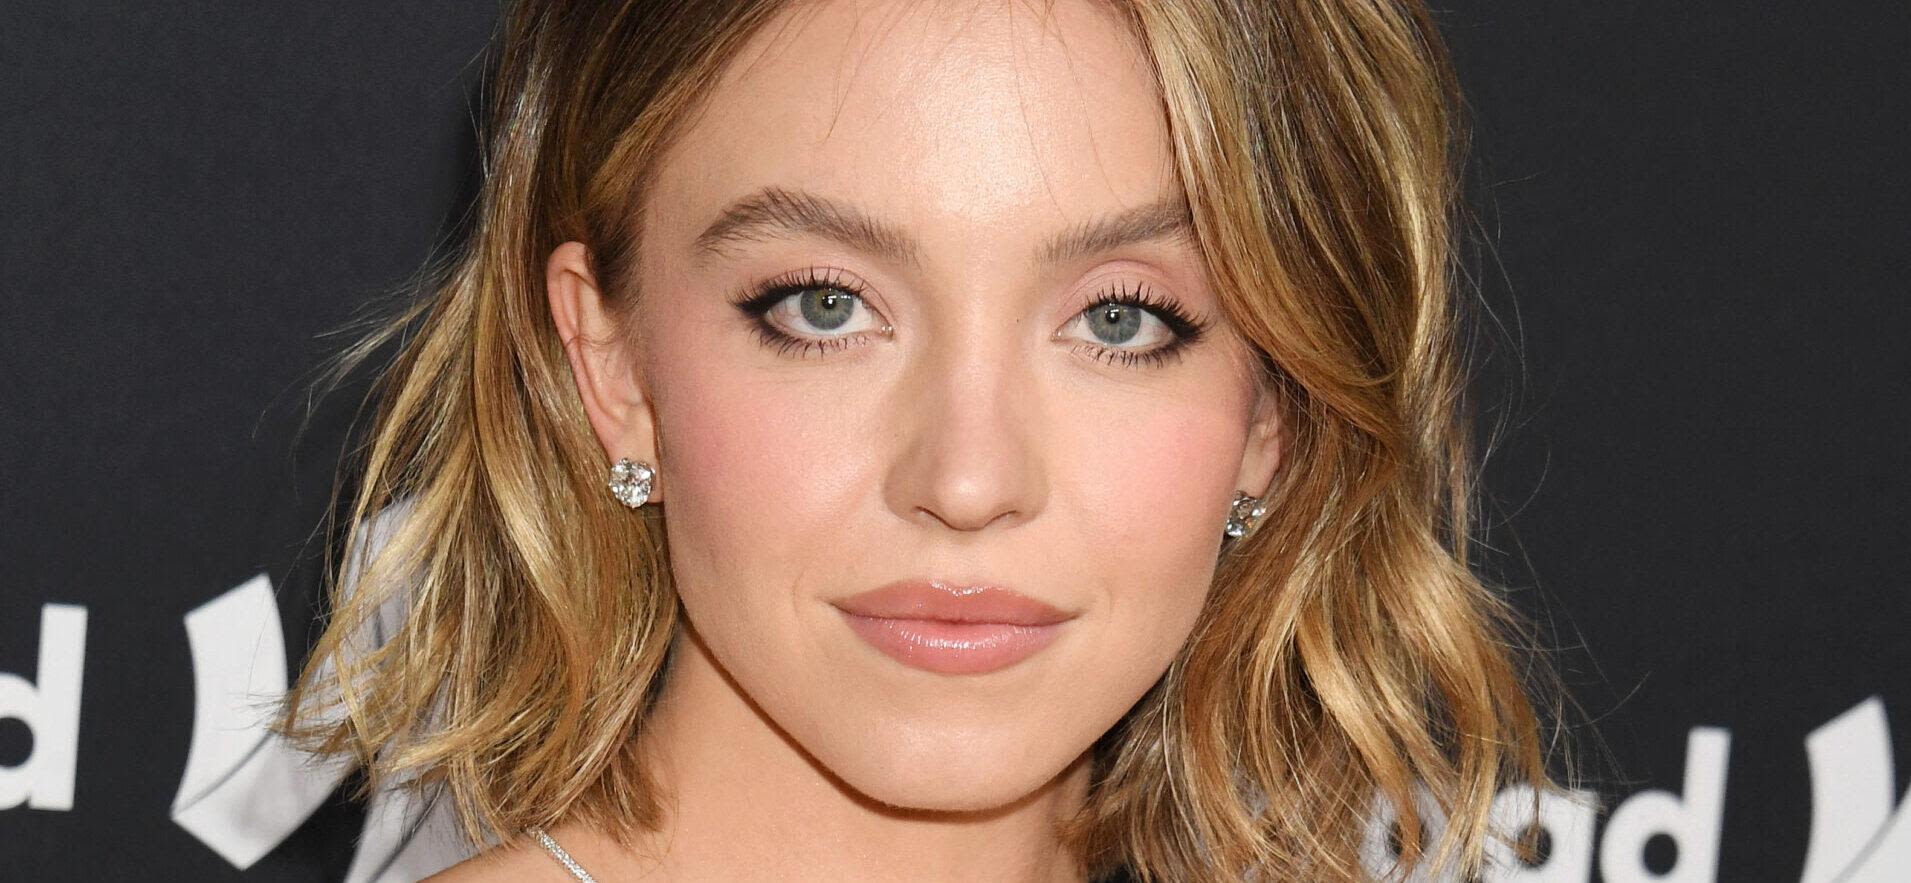 Sydney Sweeney Touches Down In Paris Ahead Of 2024 Olympics: See The Snaps!